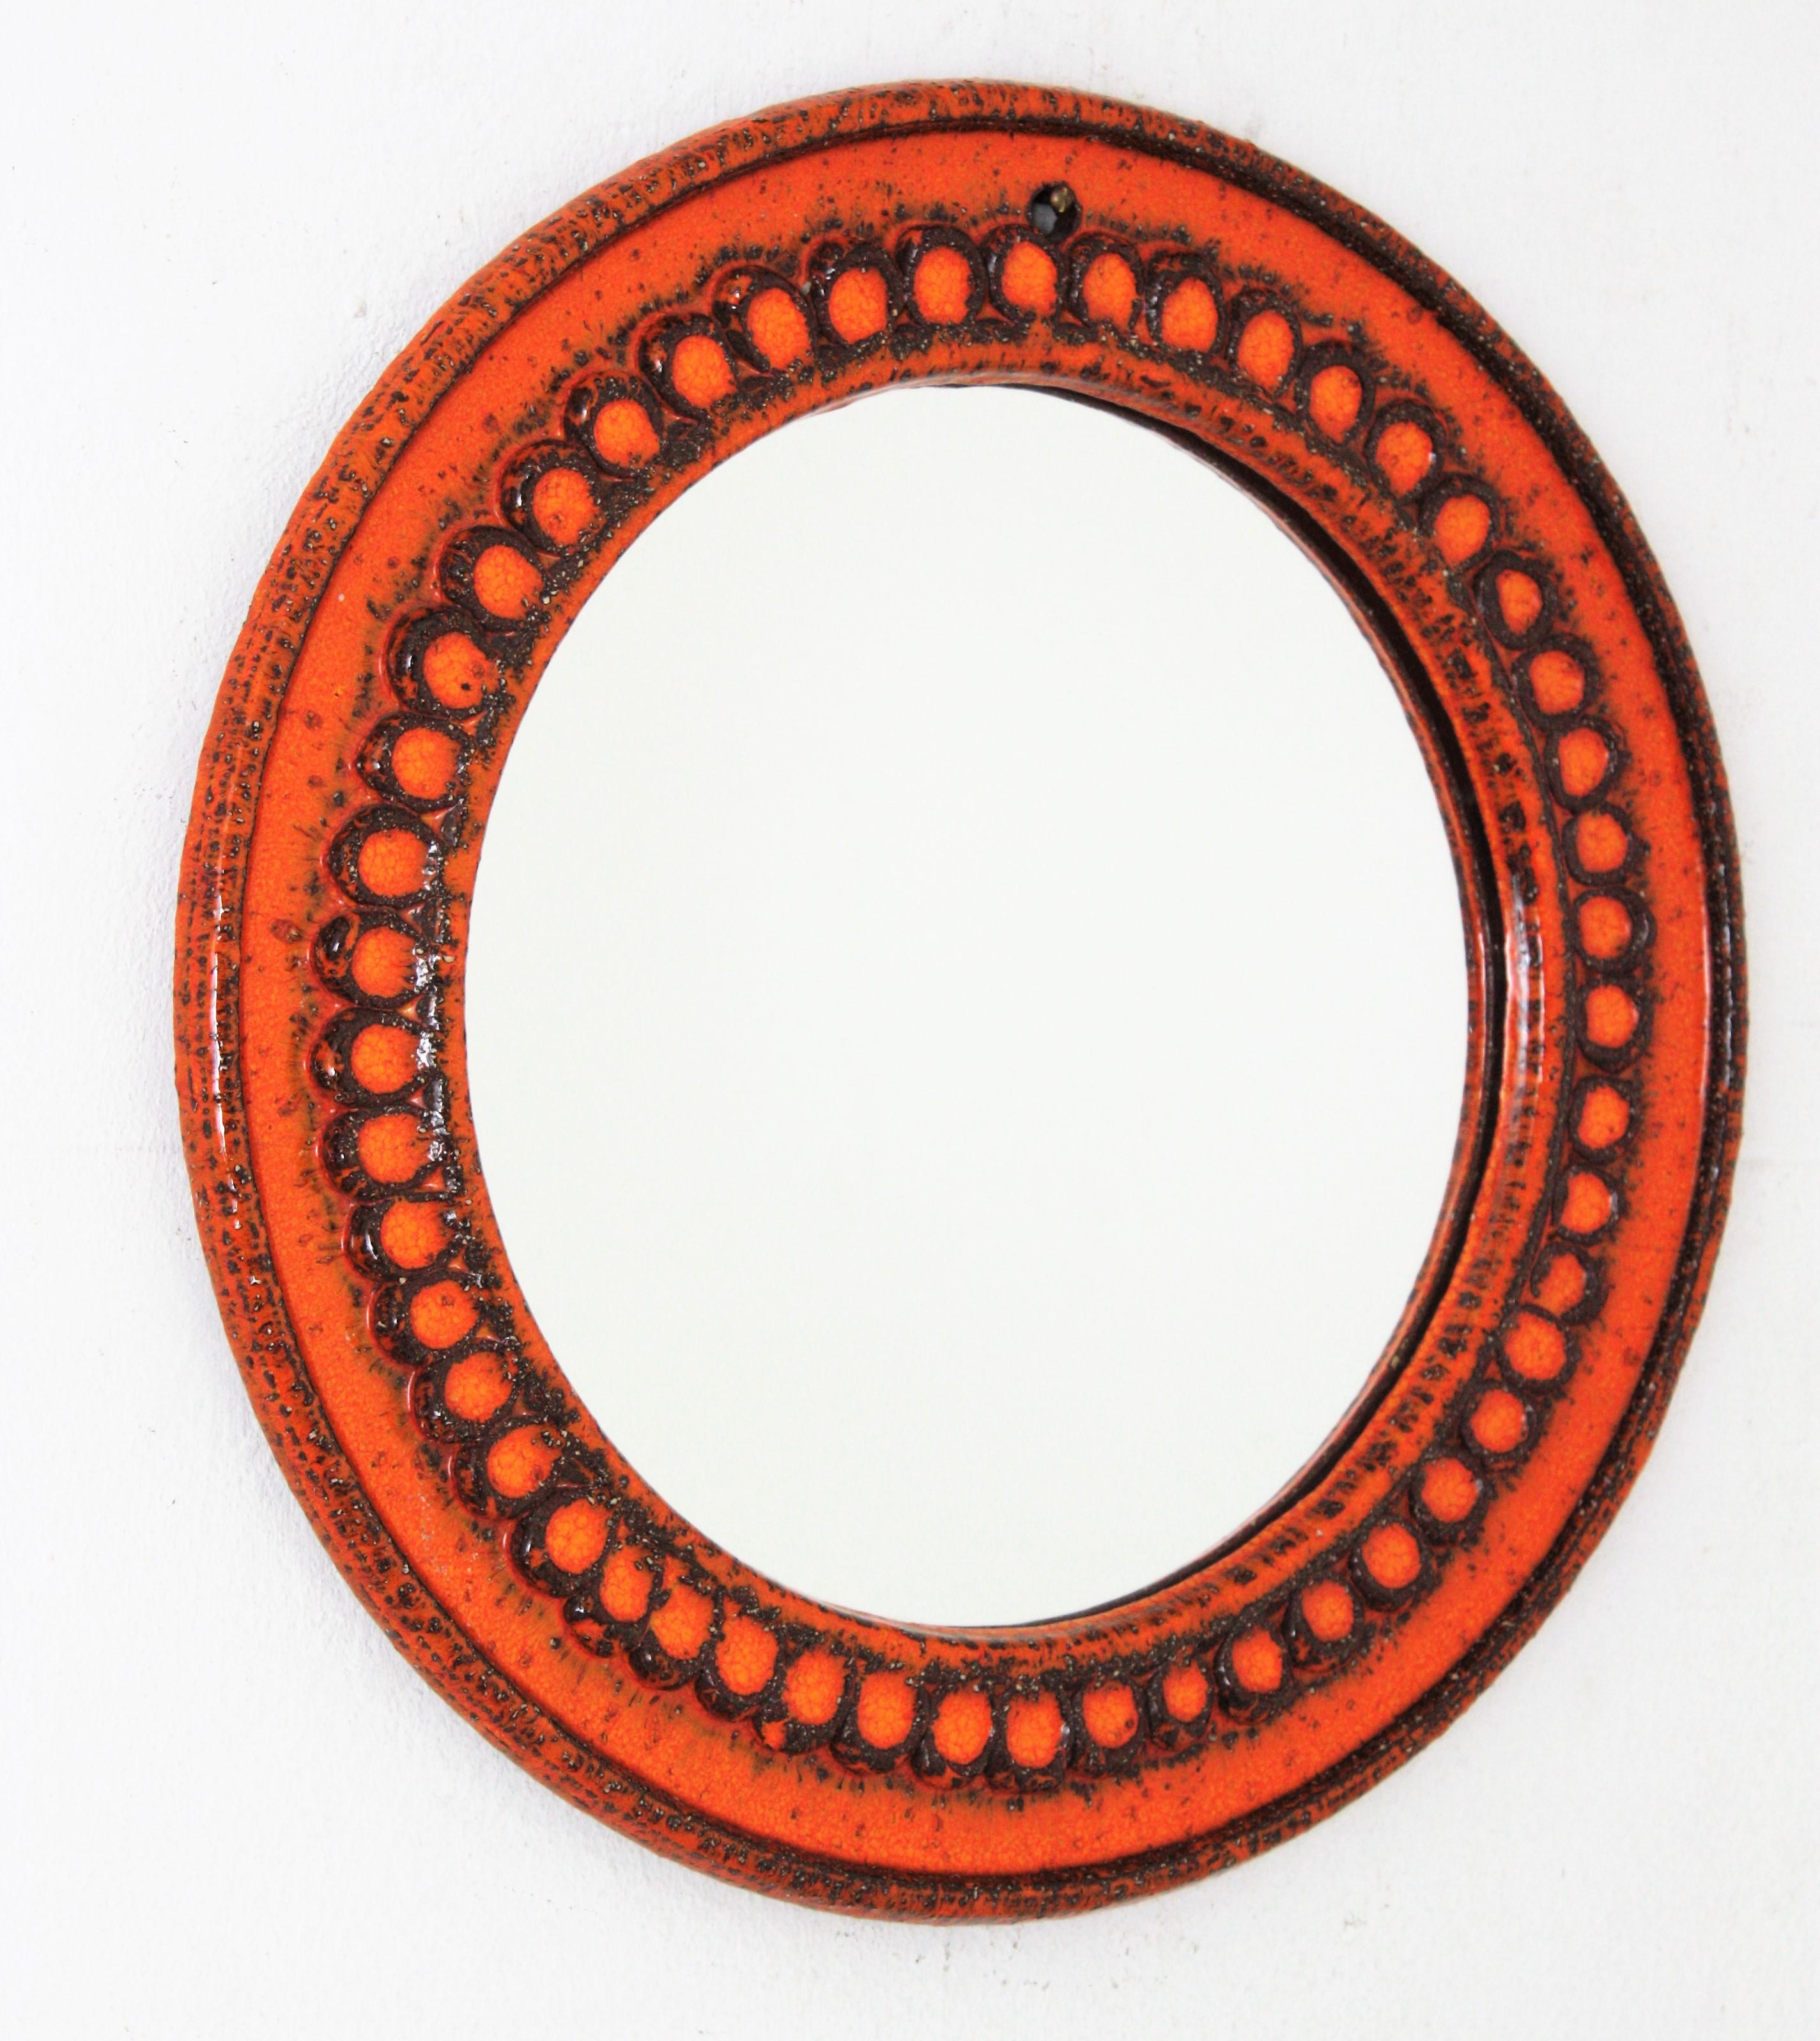 Round wall mirror by Villeroy Boch in orange glazed terracota, Germany, 1960s-1970s
German Midcentury-Modern orange terracotta glazed ceramic circular mirror with geometric pattern surrounding the glass.
This mirror will be a colorful midcentury